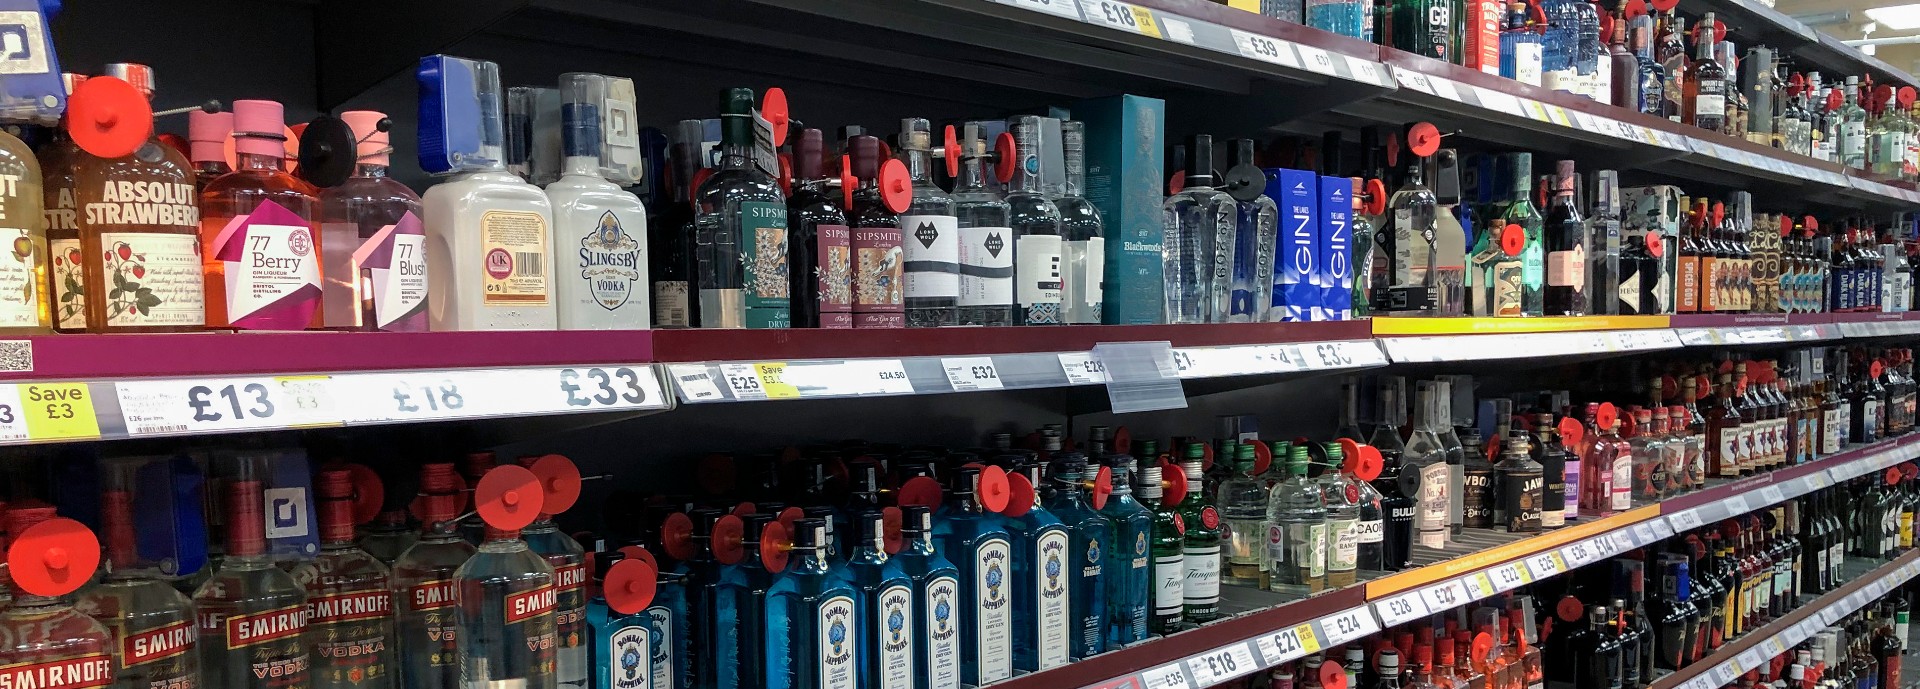 Wide range of alcohol for sale in a British supermarket.